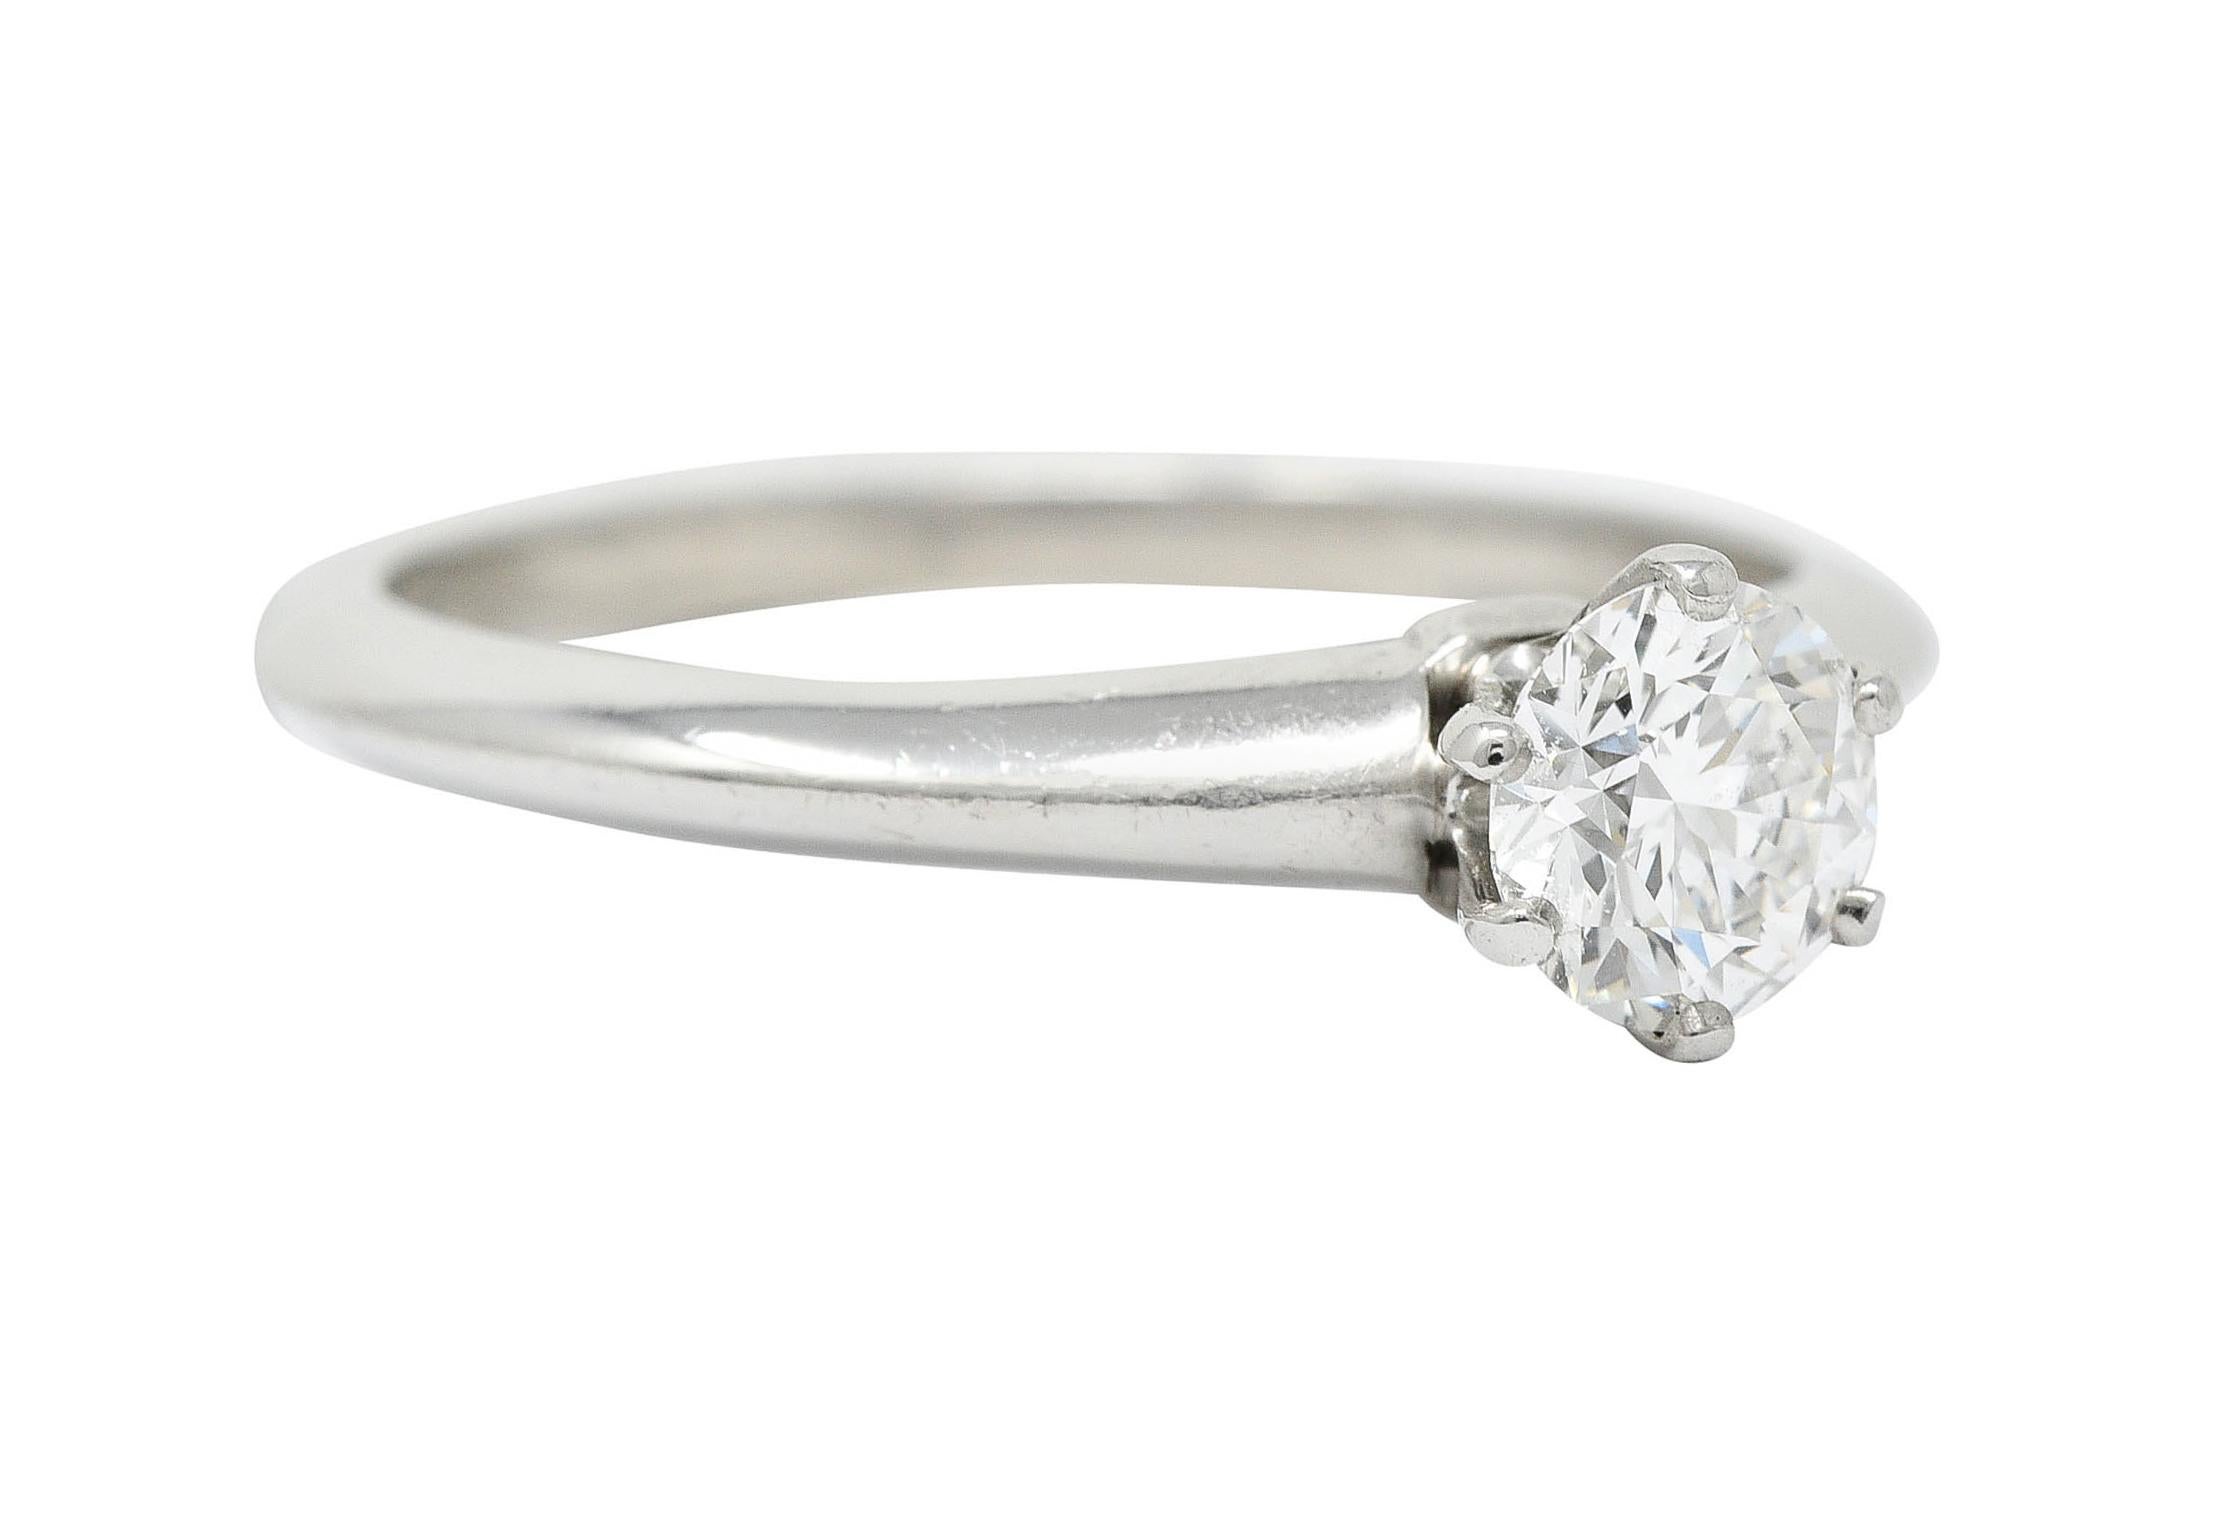 Centering a round brilliant cut diamond weighing 0.60 carat - H color and VS1 clarity

Set in a six pronged head of a solitaire style engagement ring

Completed by a subtle knife edged shank

Stamped PT950 for platinum

Numbered and fully signed